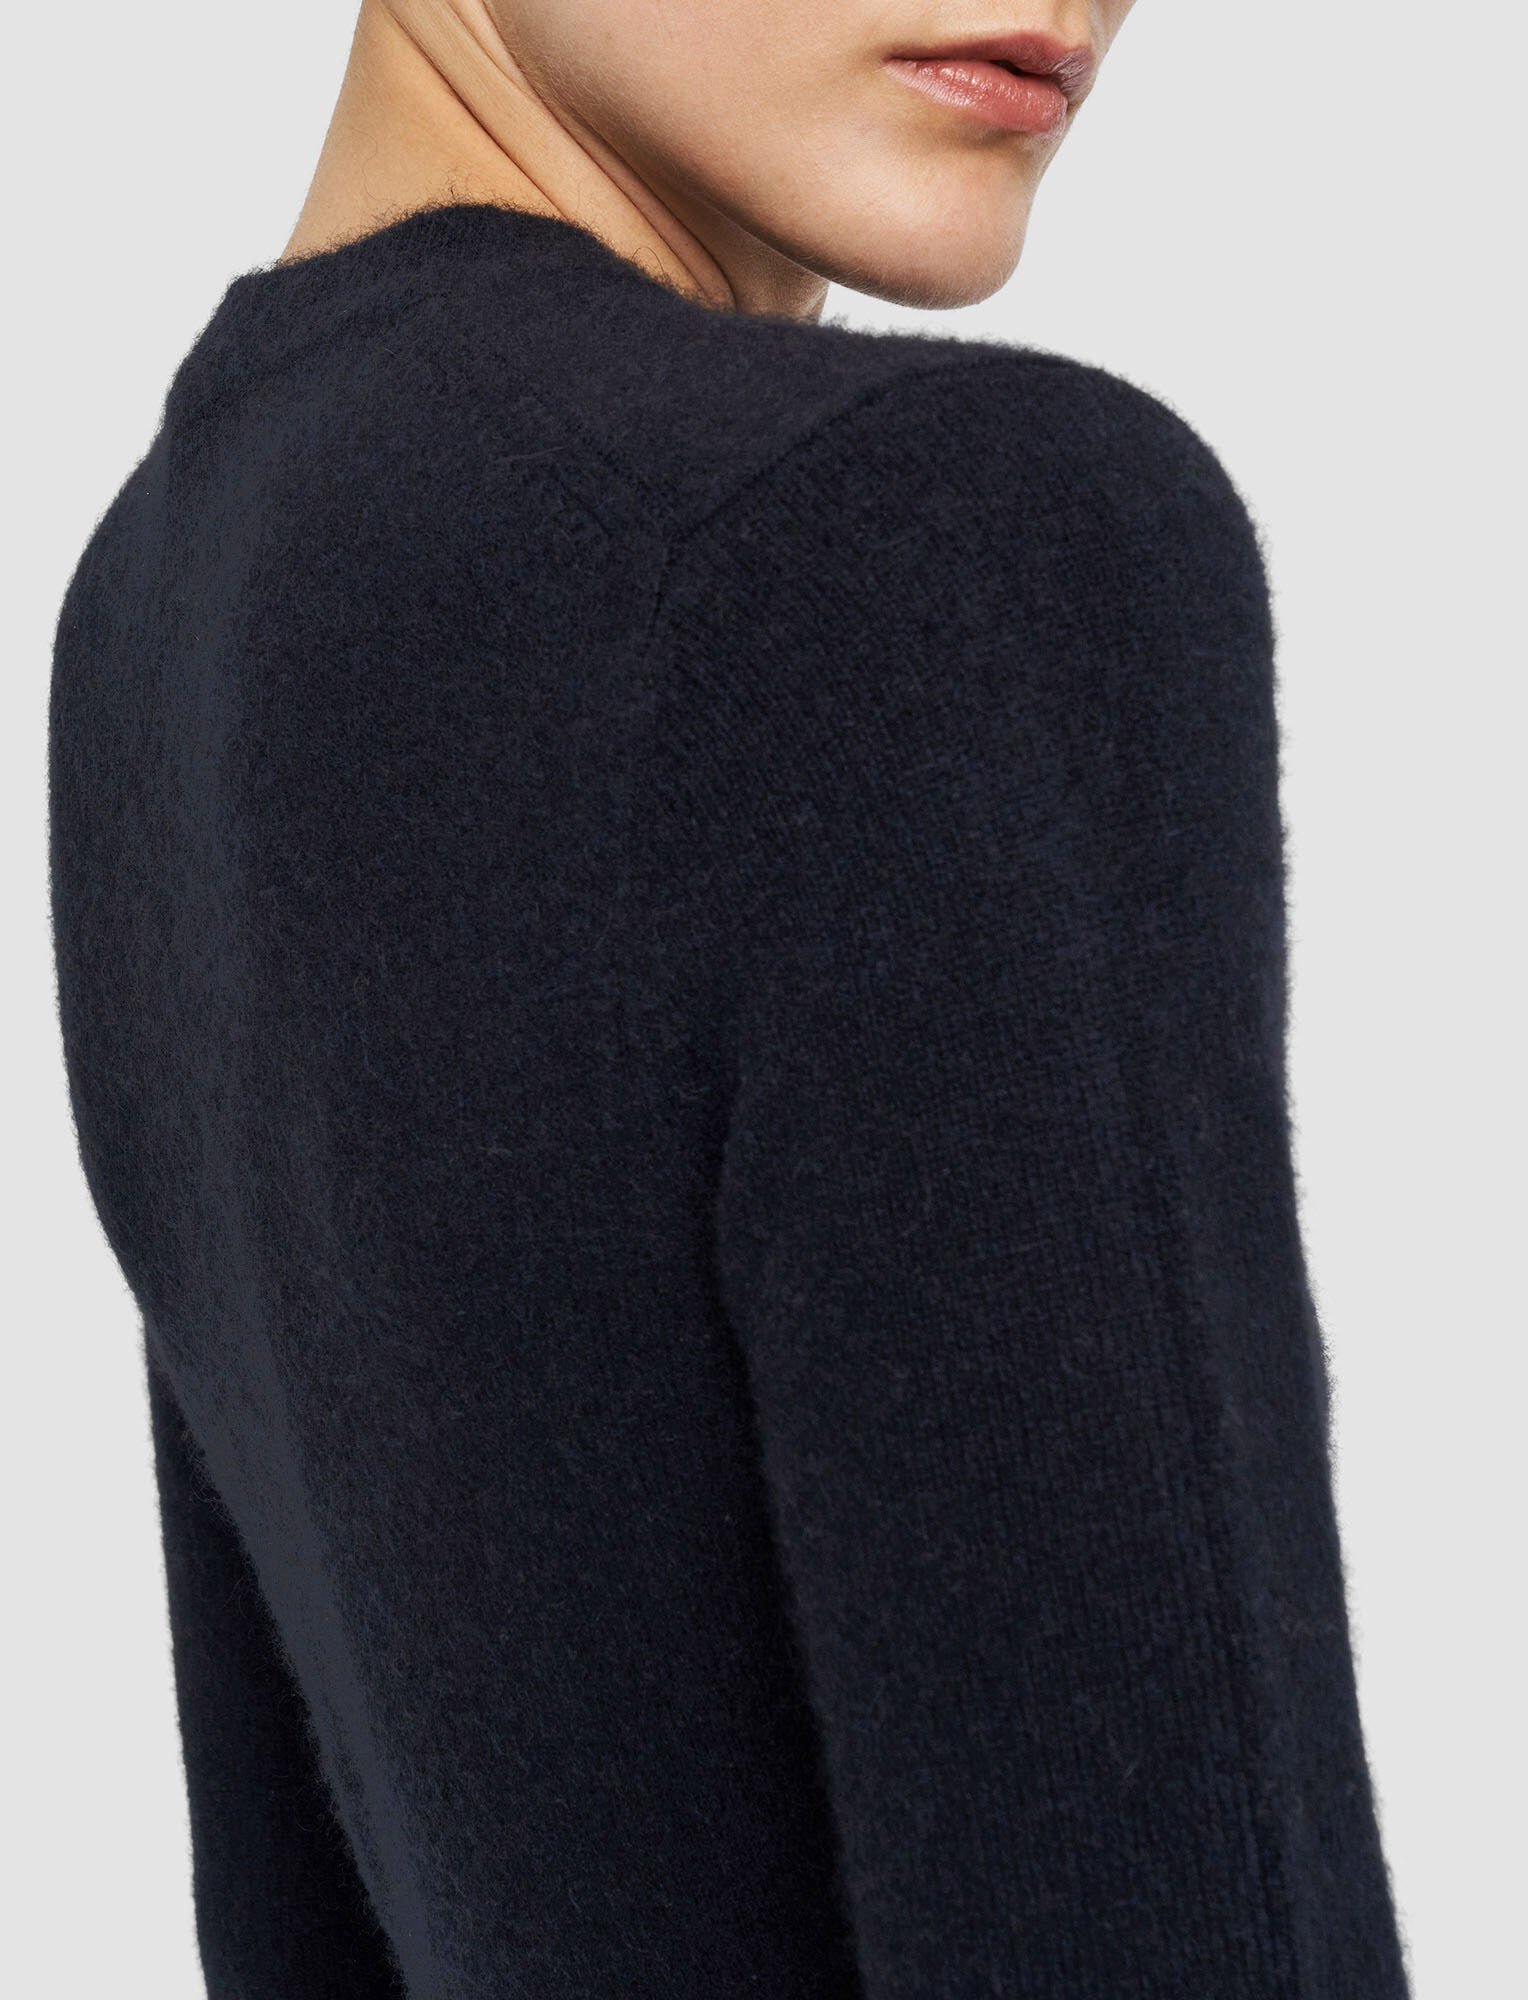 Joseph, Brushed Cashmere Dress, in Navy